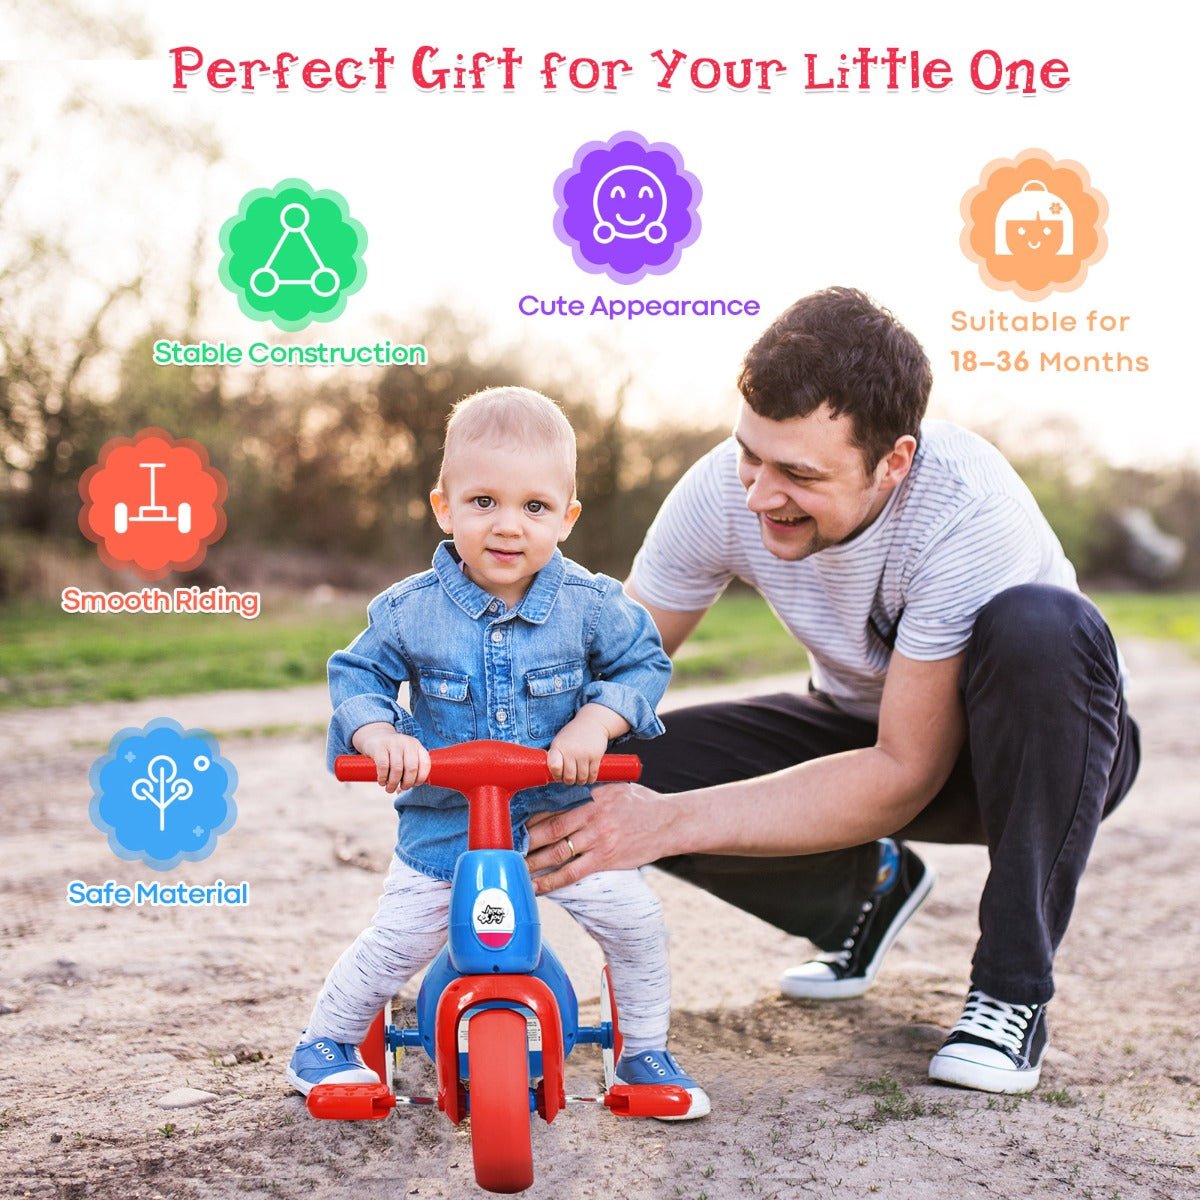 Pedal and Explore: Blue Toddler Tricycle with Foot Pedals for Kids